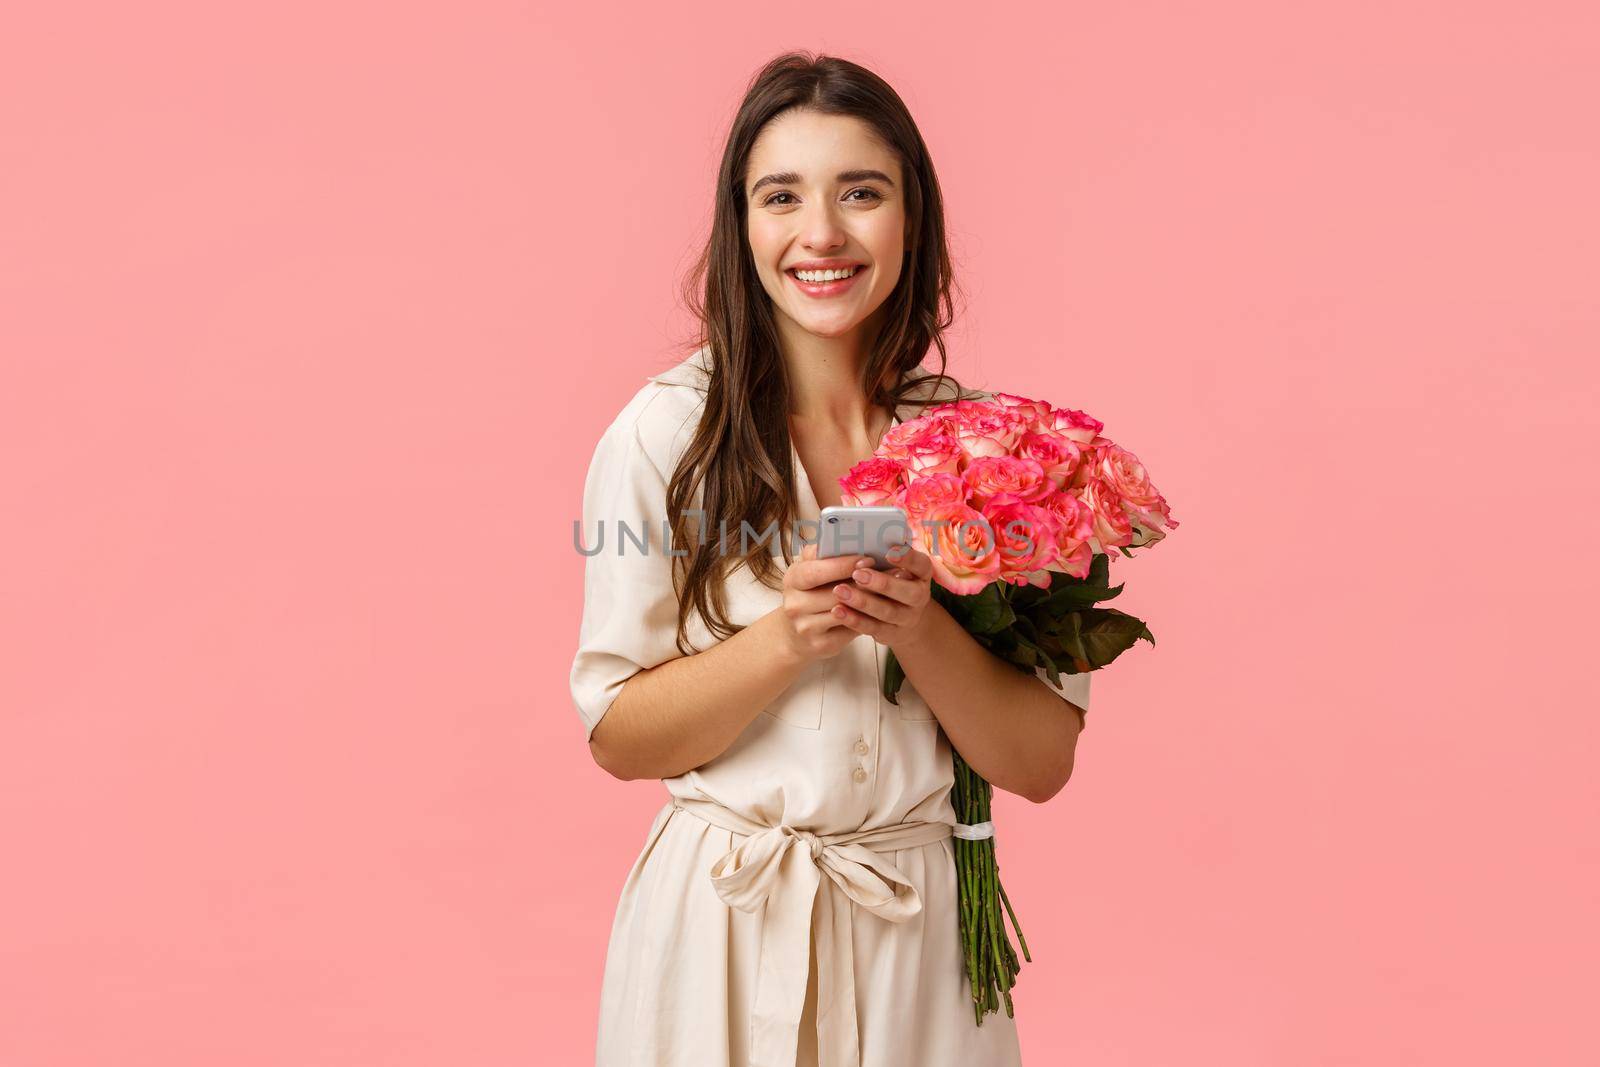 Technology, romance and happiness concept. Tender young cheerful smiling woman with beautiful flowers, holding smartphone, answer on congratulations b-day, chatting on birthday, pink background.